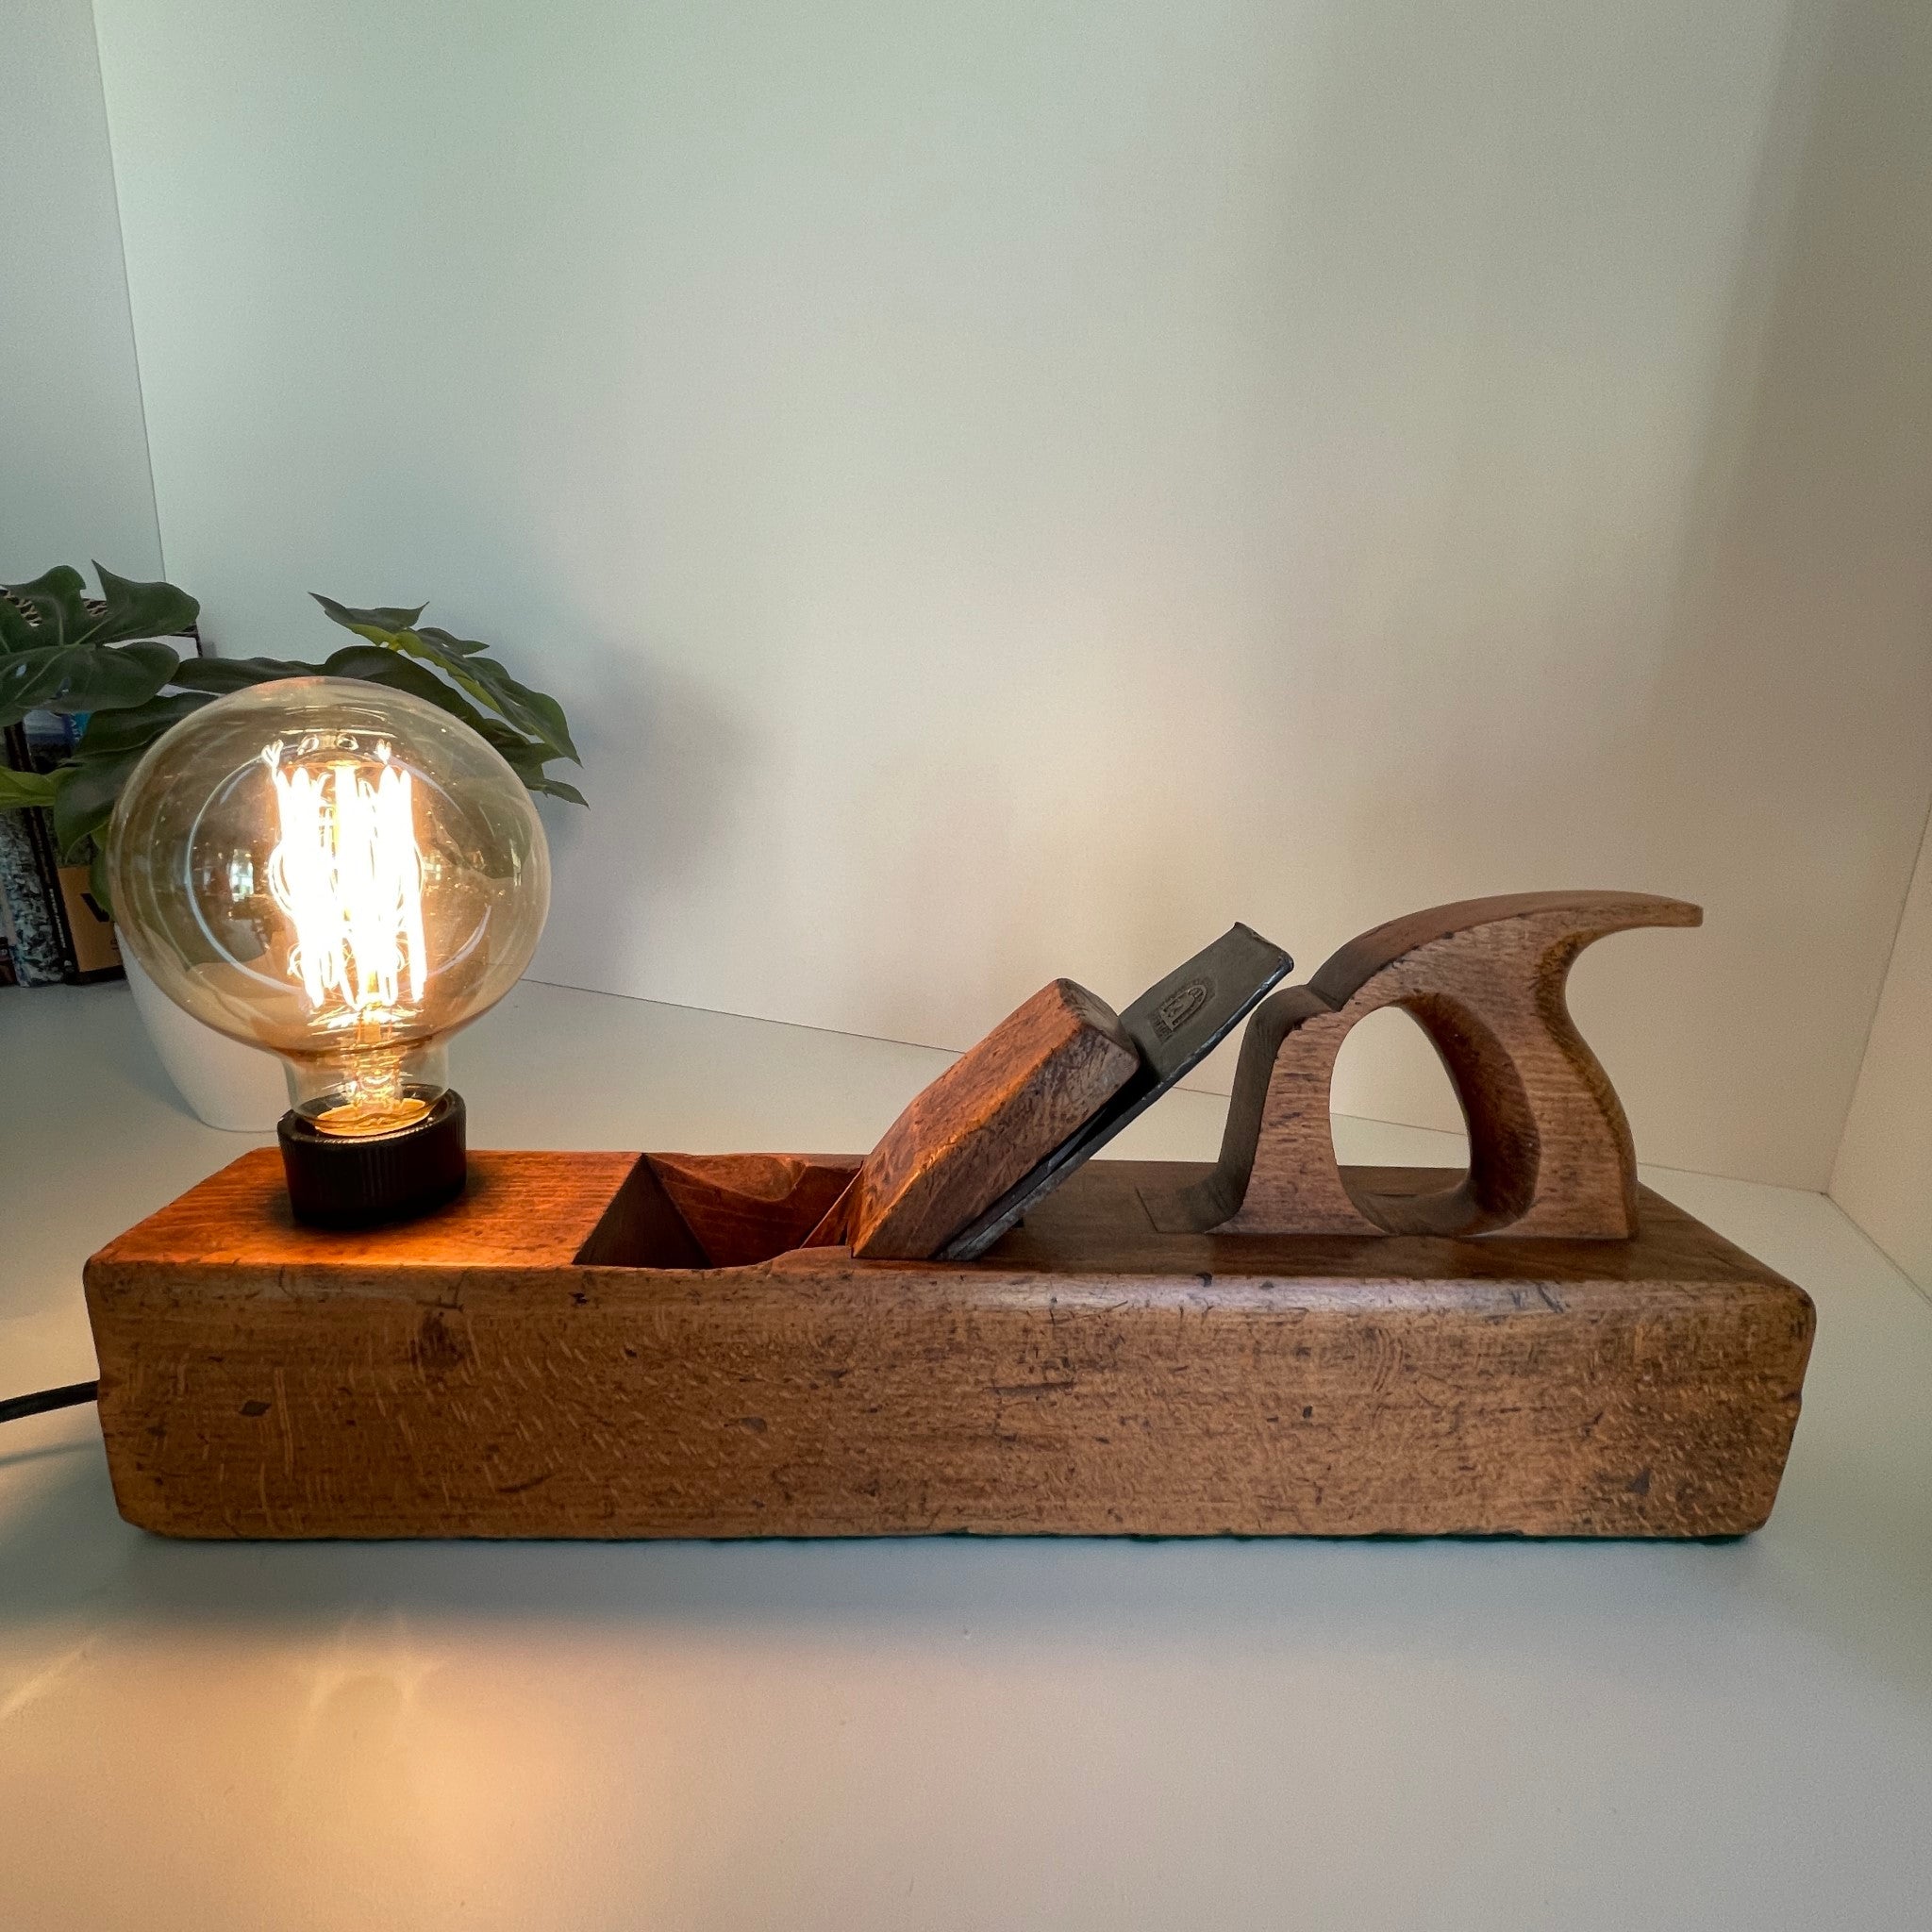 Vintage table lamp, old wood plane with edison bulb, crafted by shades at grays, nz. Full front view.